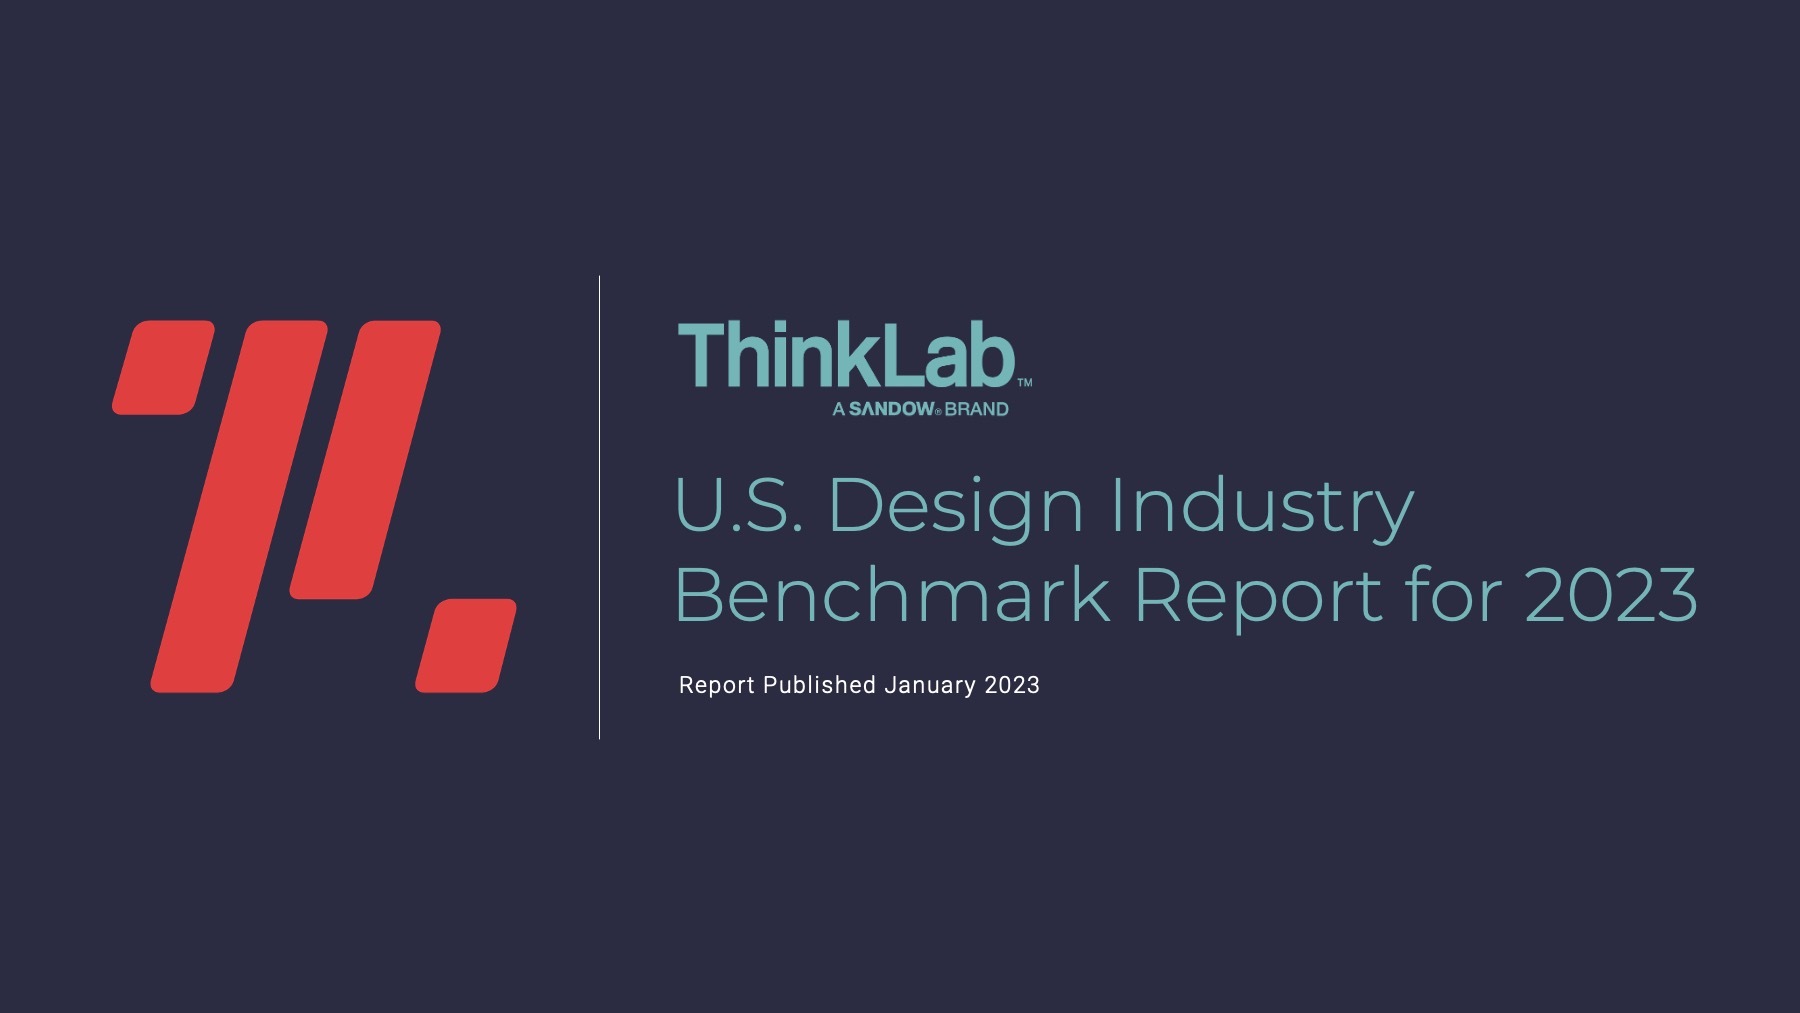 ThinkLab U.S. Design Industry Benchmark Report for 2023